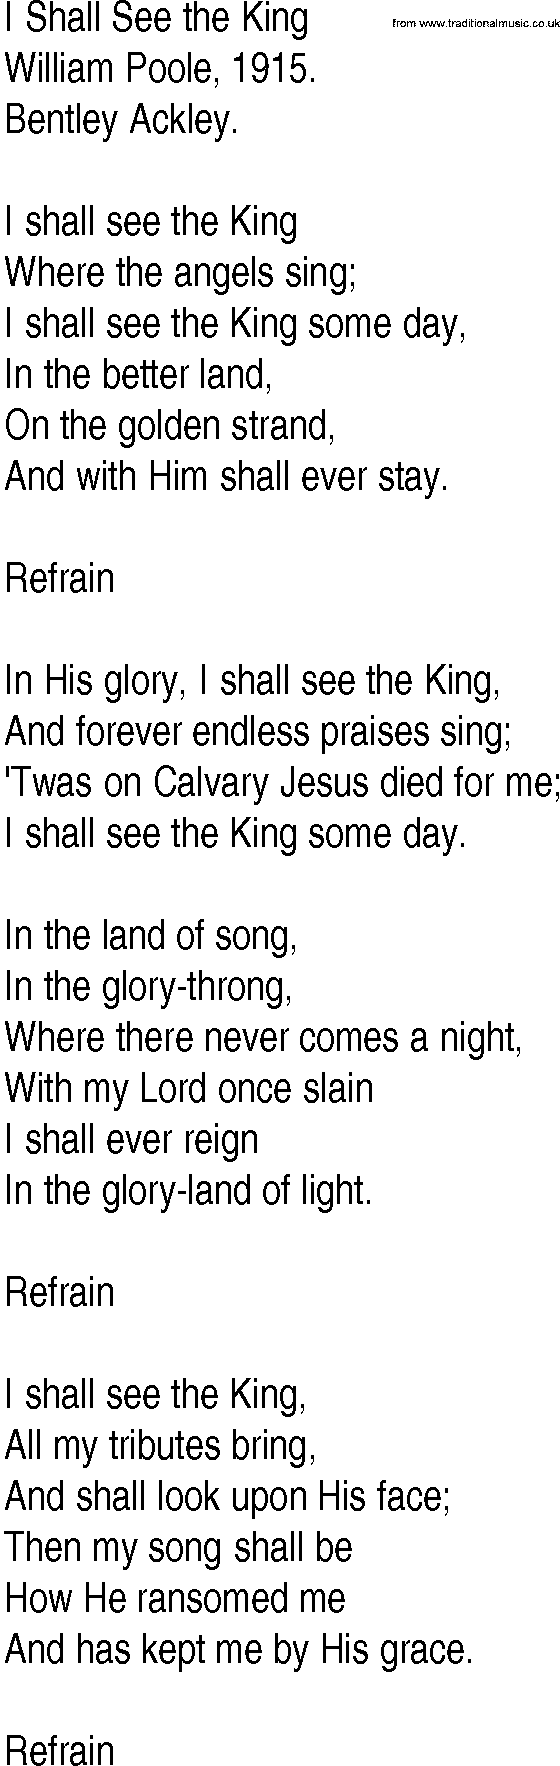 Hymn and Gospel Song: I Shall See the King by William Poole lyrics